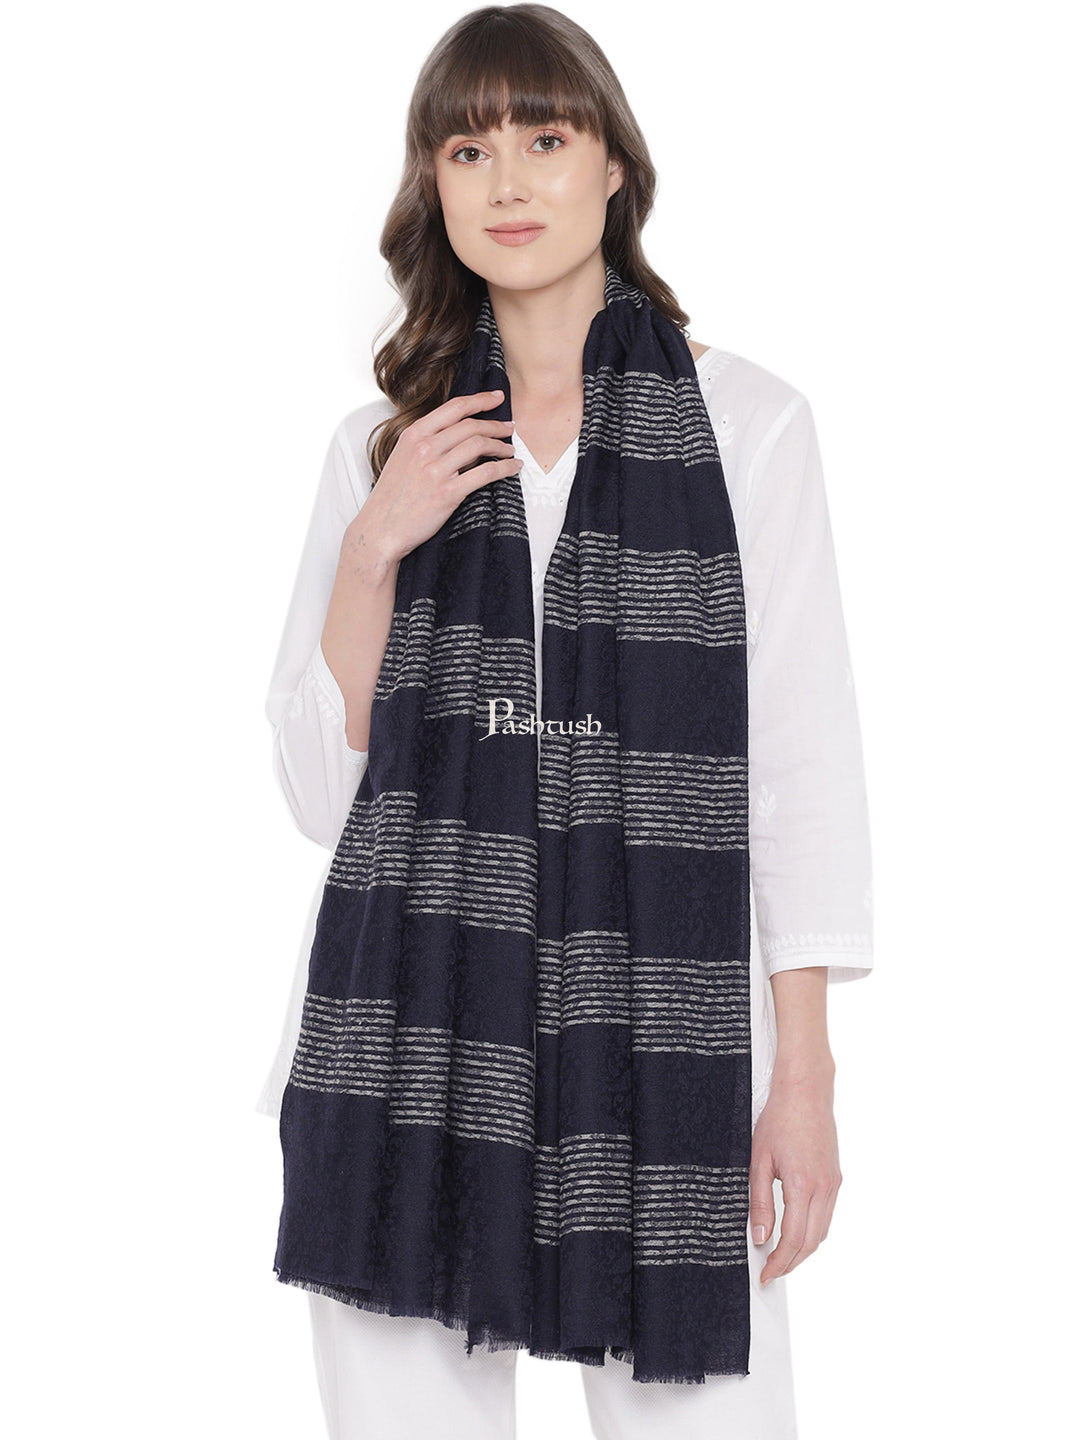 Pashtush India Womens Stoles and Scarves Scarf Pashtush Womens Self Stole, Fine Wool, Striped Weave, Navy Blue